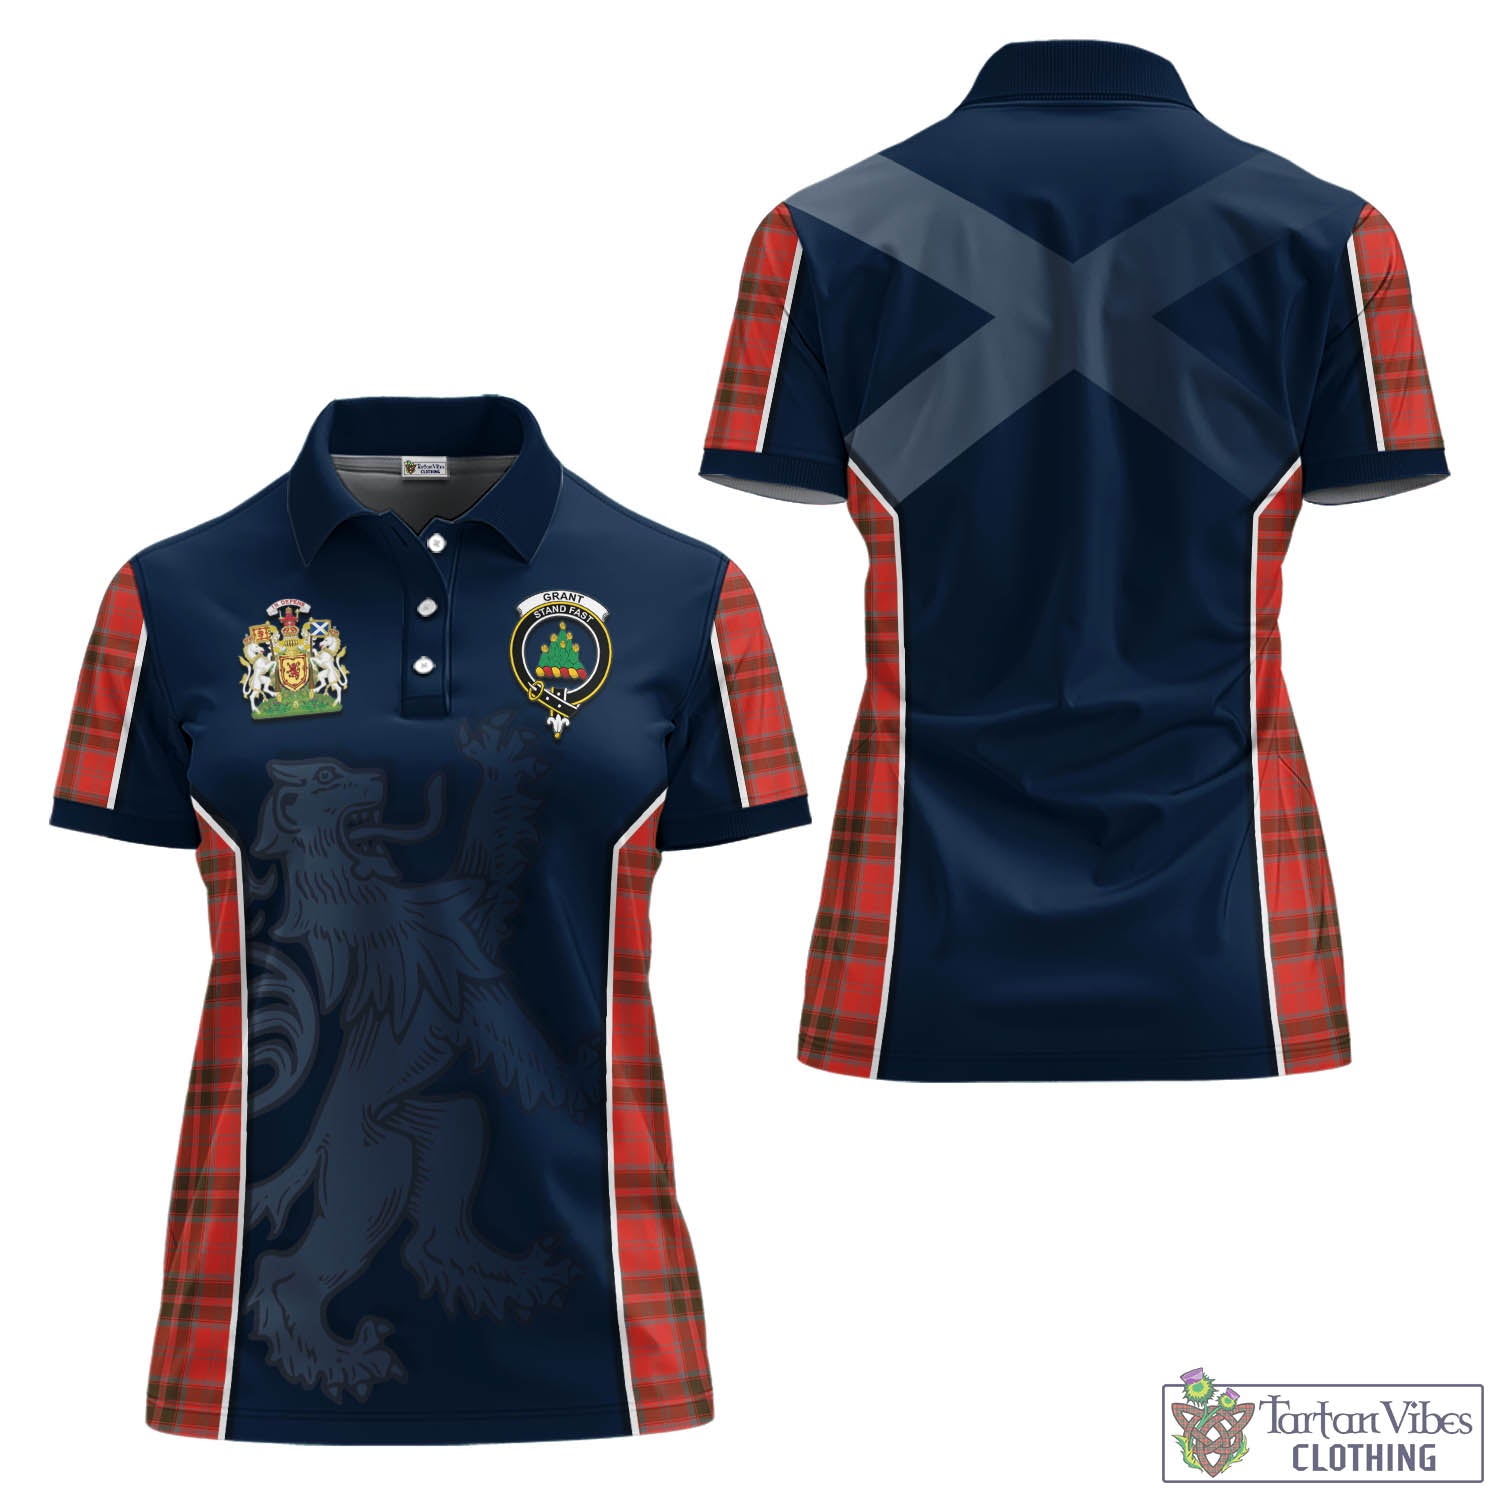 Tartan Vibes Clothing Grant Weathered Tartan Women's Polo Shirt with Family Crest and Lion Rampant Vibes Sport Style